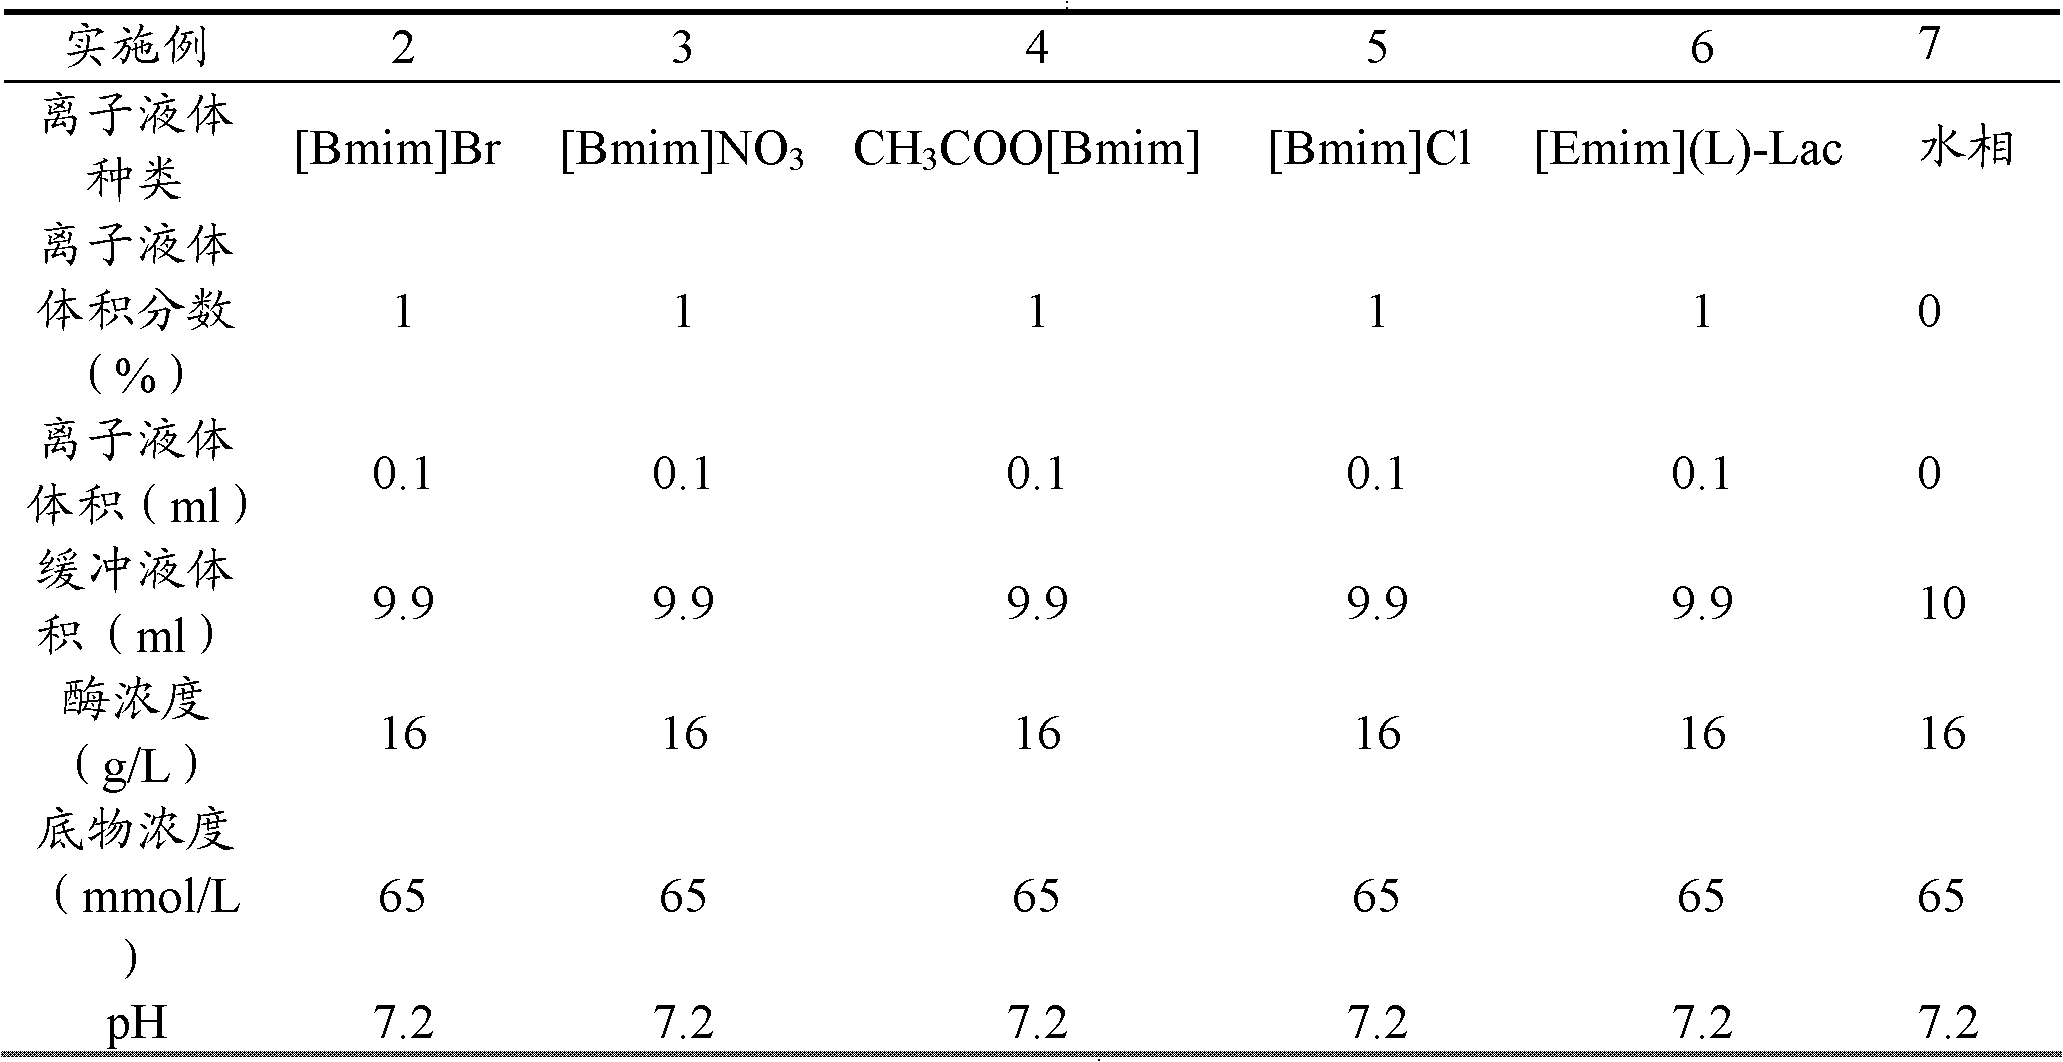 Method for preparing (S)-(+)-2,2-dimethyl cyclopropane methanoic acid by biological resolution in ionic liquid cosolvent